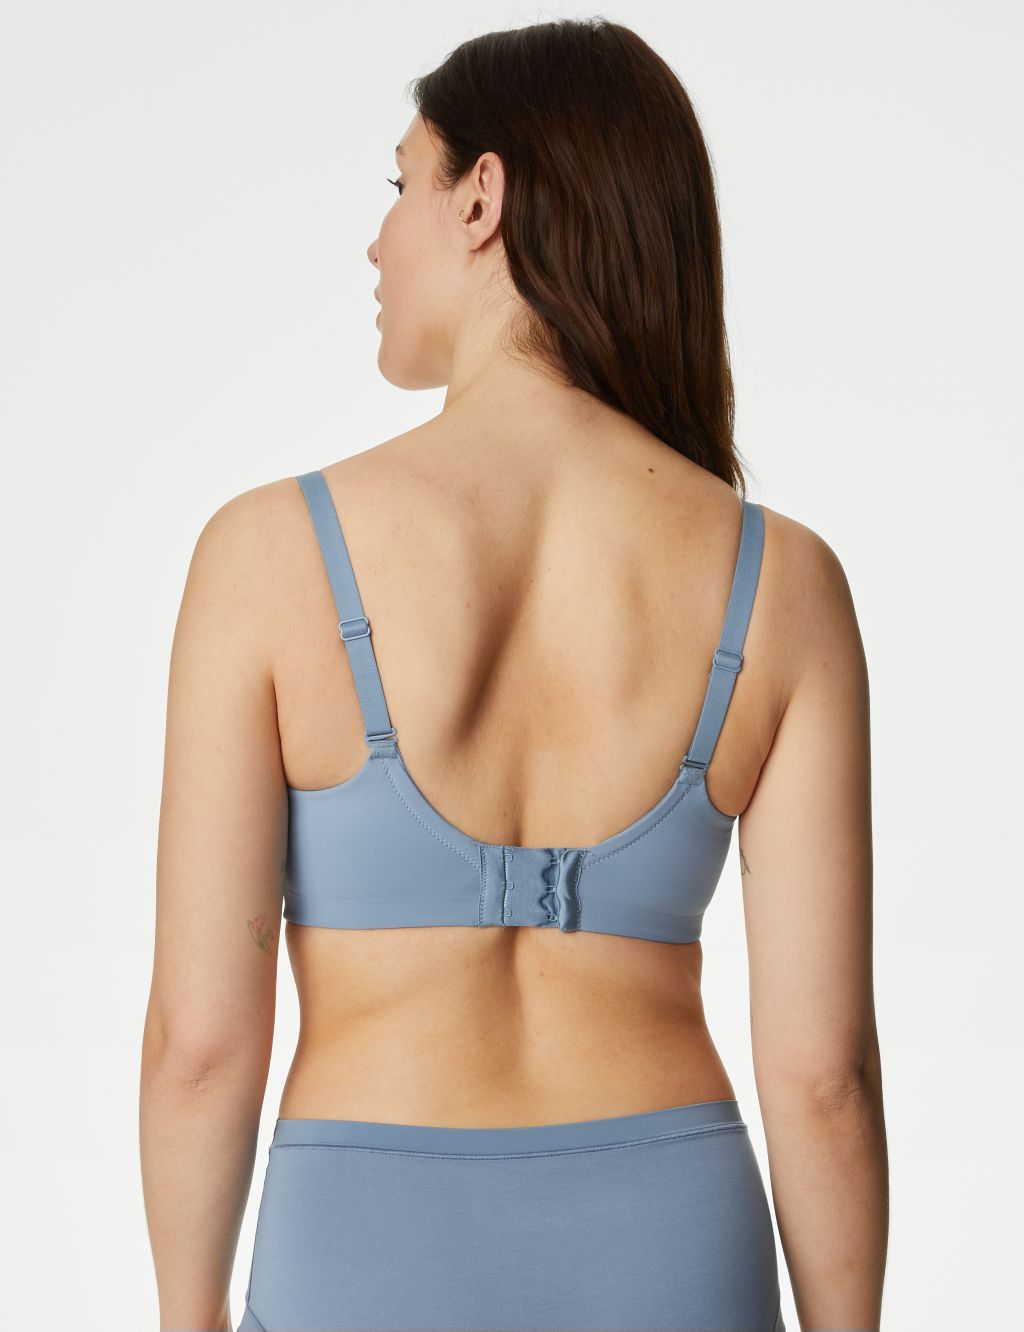 Flexifit™ Non-Wired Full Cup Bra F-H image 4